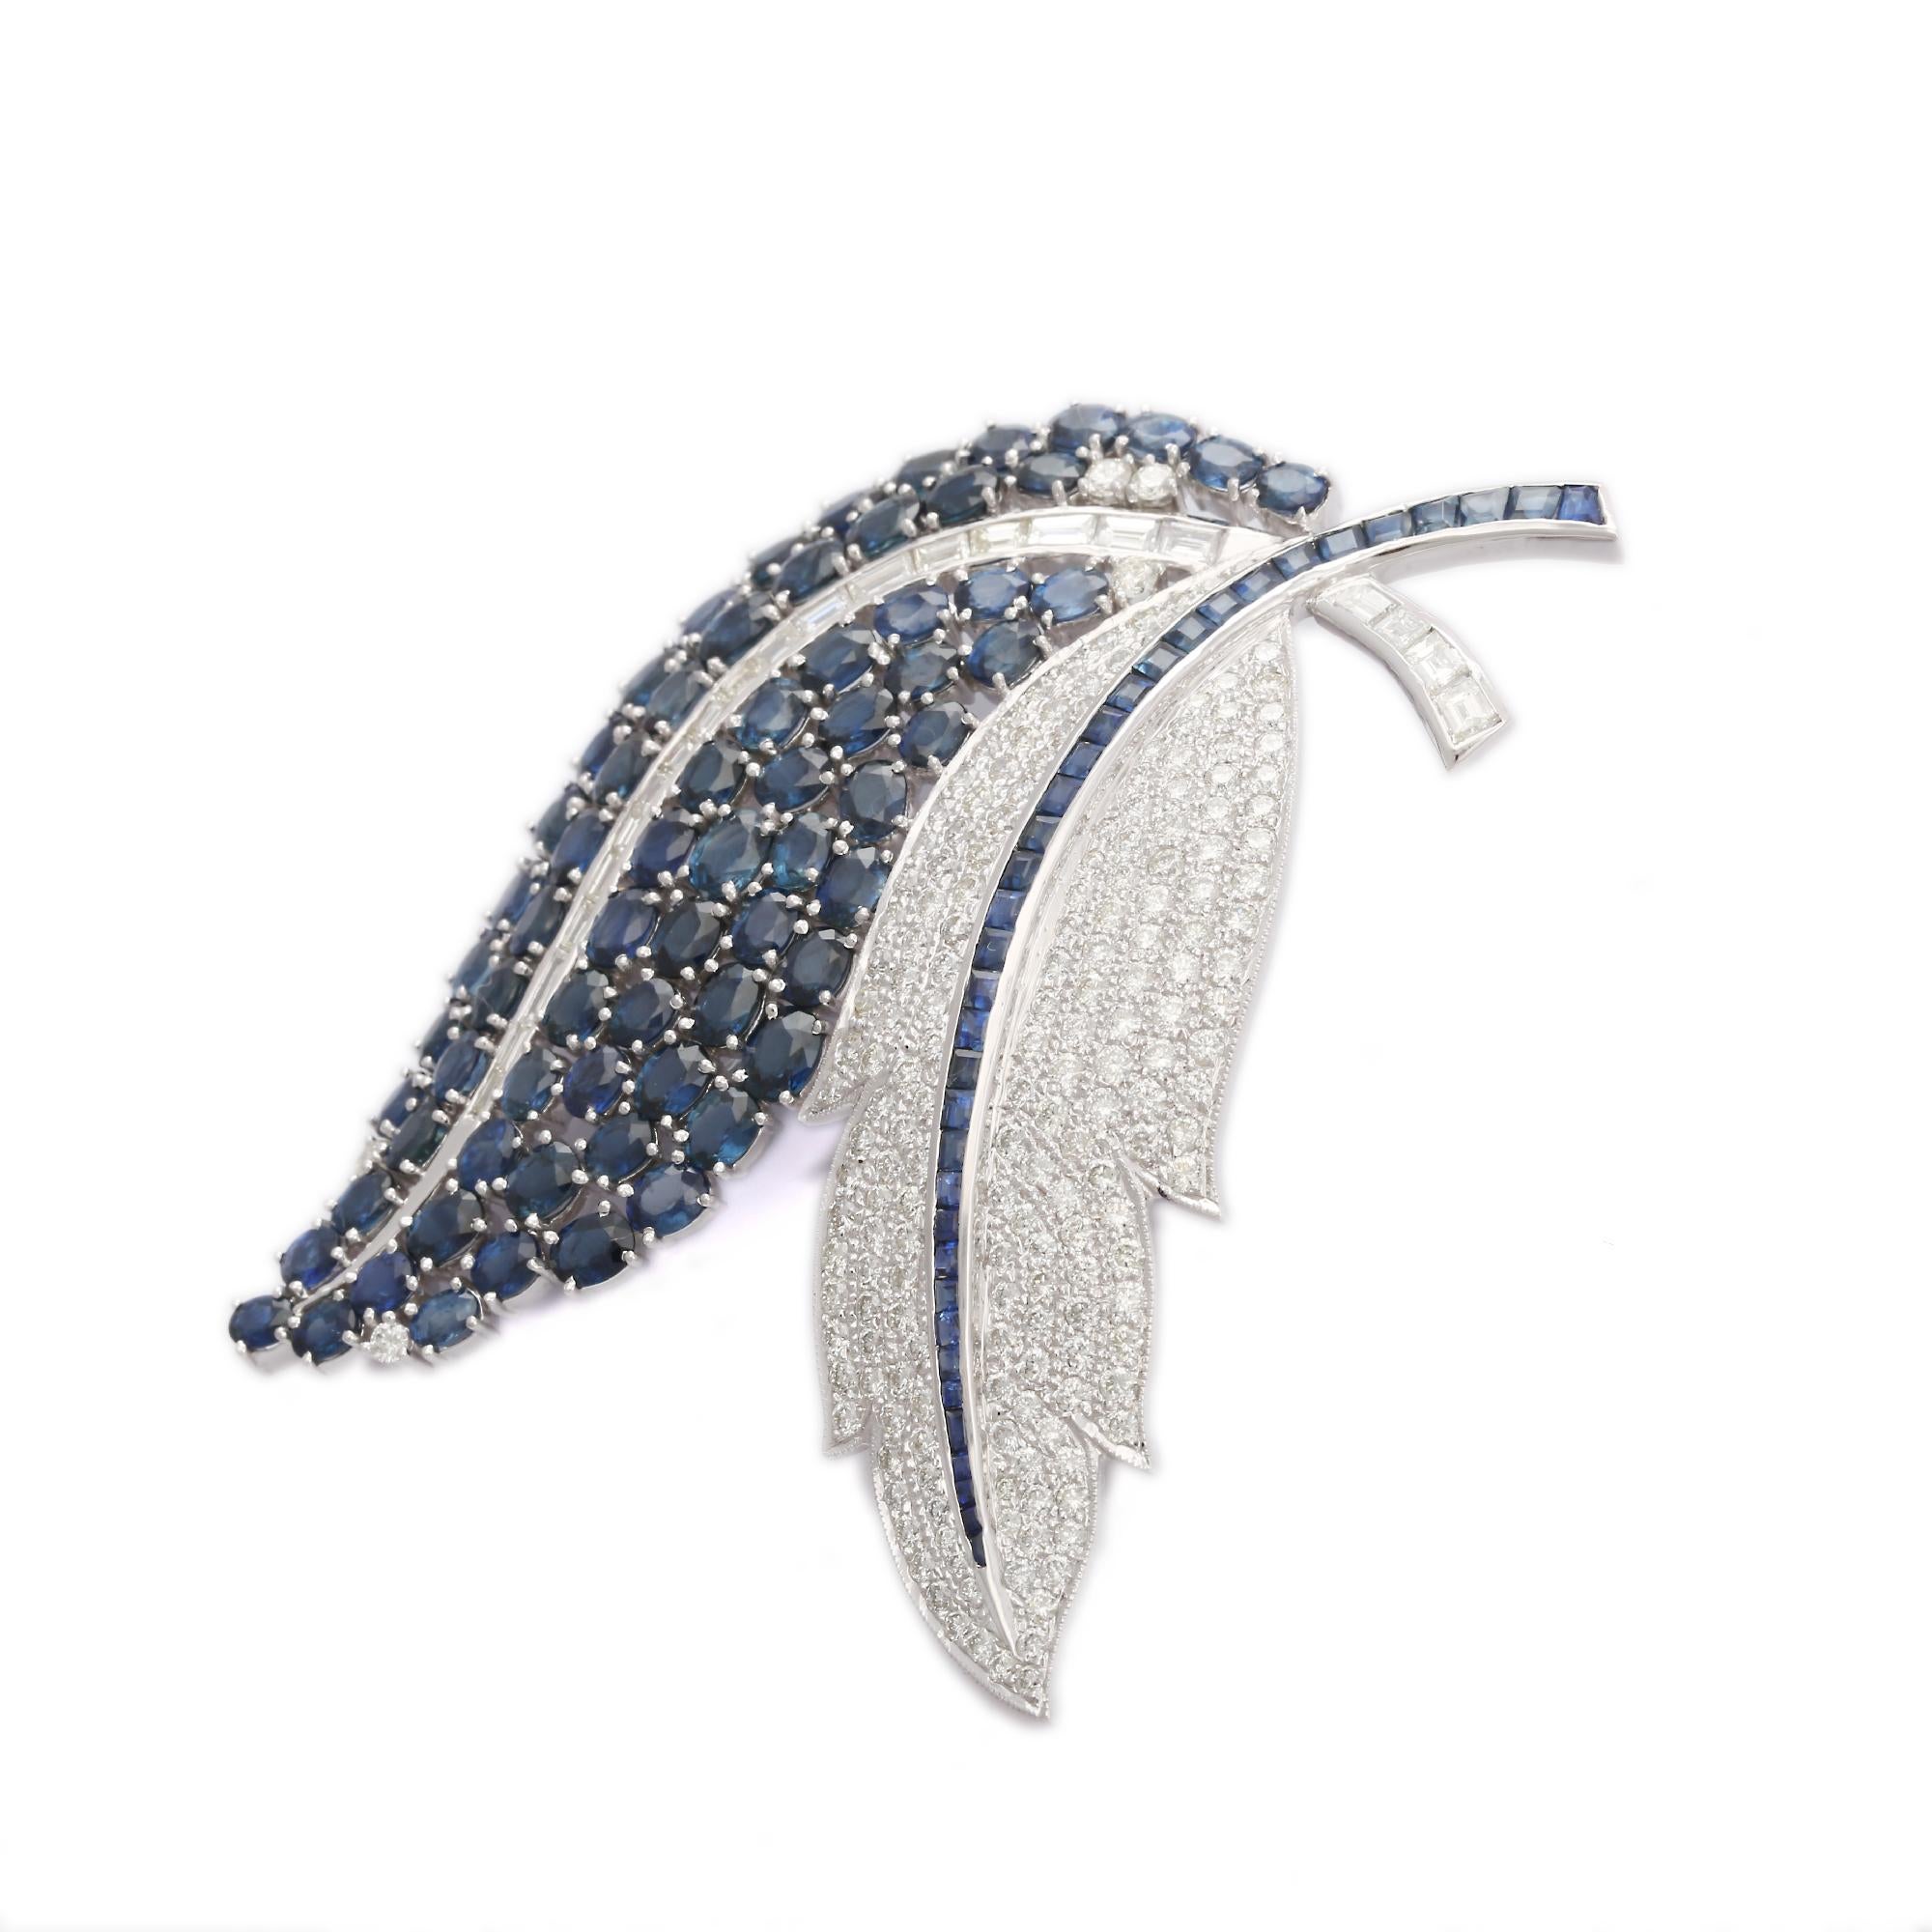 Blue Sapphire and Diamond Feather Brooch Made in 18K Gold which is a fusion of surrealism and pop-art, designed to make a bold statement. Crafted with love and attention to detail, this features 23.97 carats of blue sapphire which makes you stand